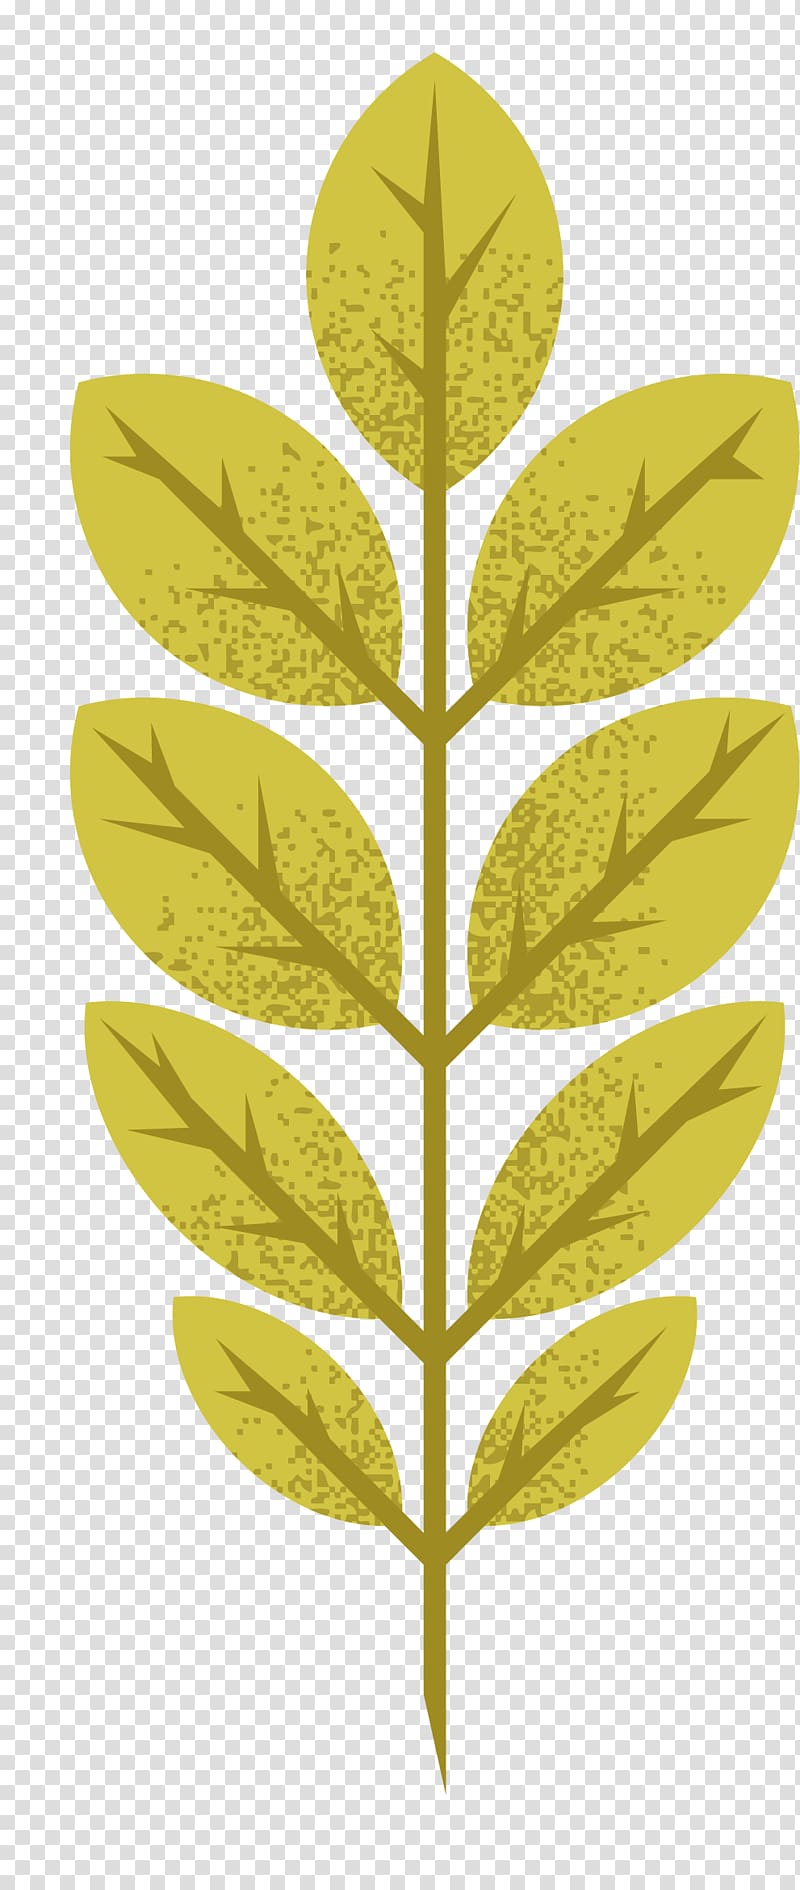 Maple leaf Autumn, Autumn leaves collection material transparent background PNG clipart